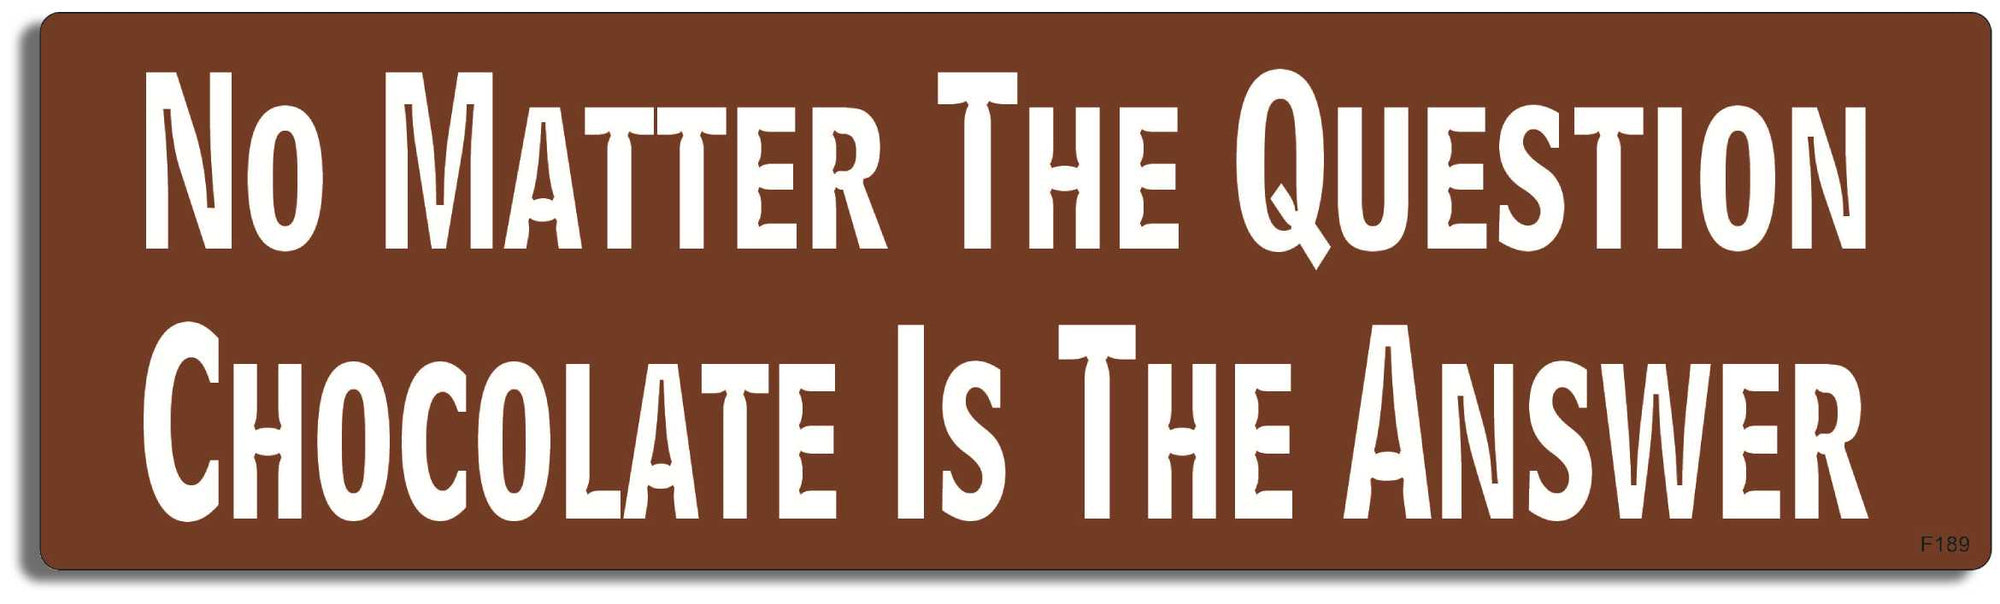 No Matter The Question Chocolate Is The Answer - 3" x 10 -  Decal Bumper Sticker-funny Bumper Sticker Car Magnet No Matter The Question Chocolate-  Decal for cars funny, funny quote, funny saying